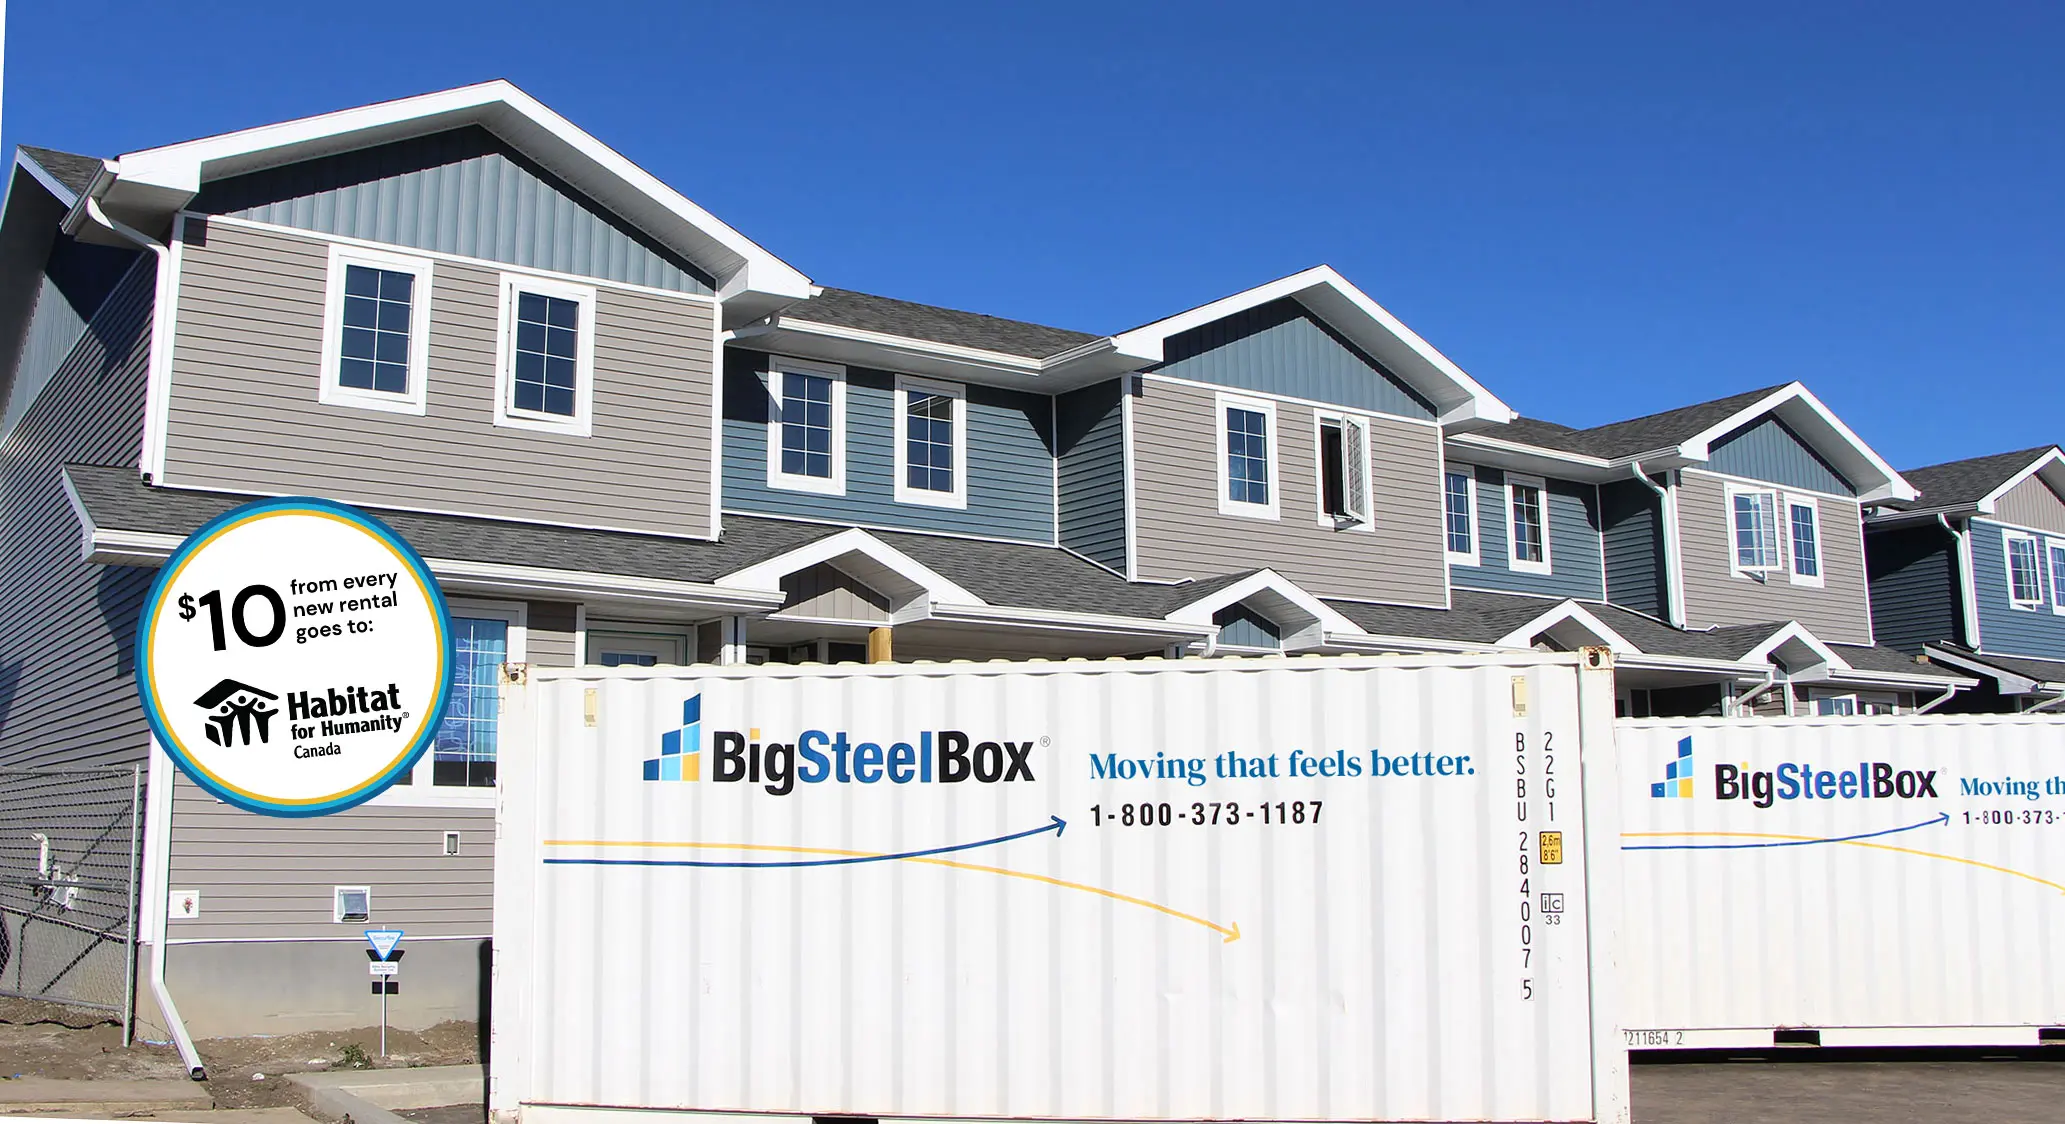 Until July 31, BigSteelBox is donating $10 from every new container rental to Habitat for Humanity Canada